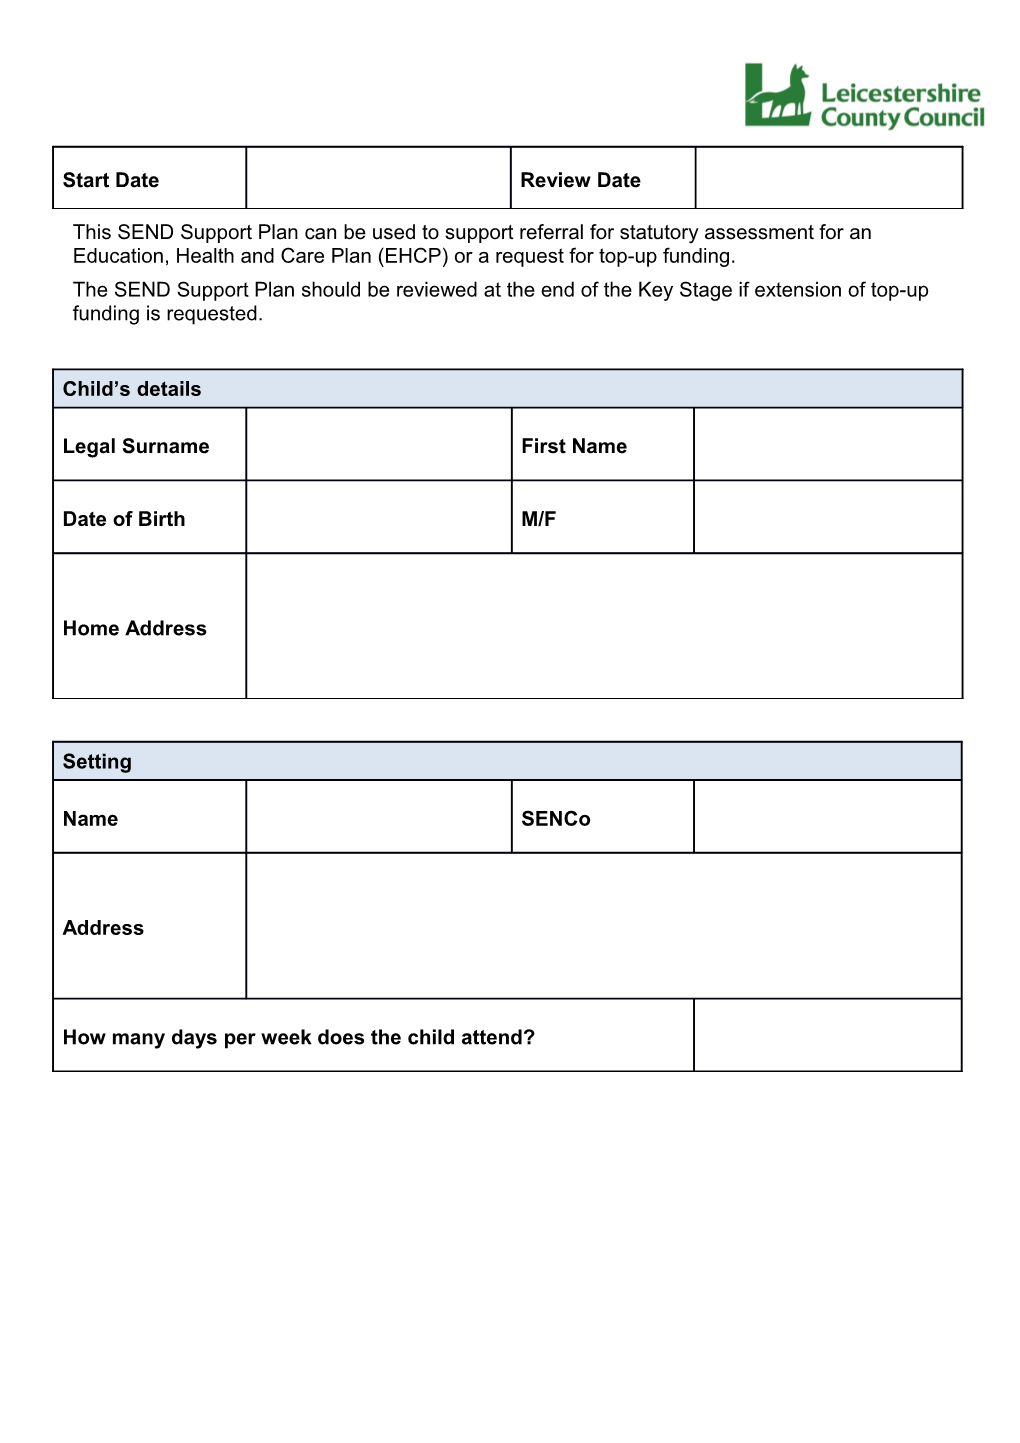 This SEND Support Plan Can Be Used to Support Referral for Statutory Assessment for An